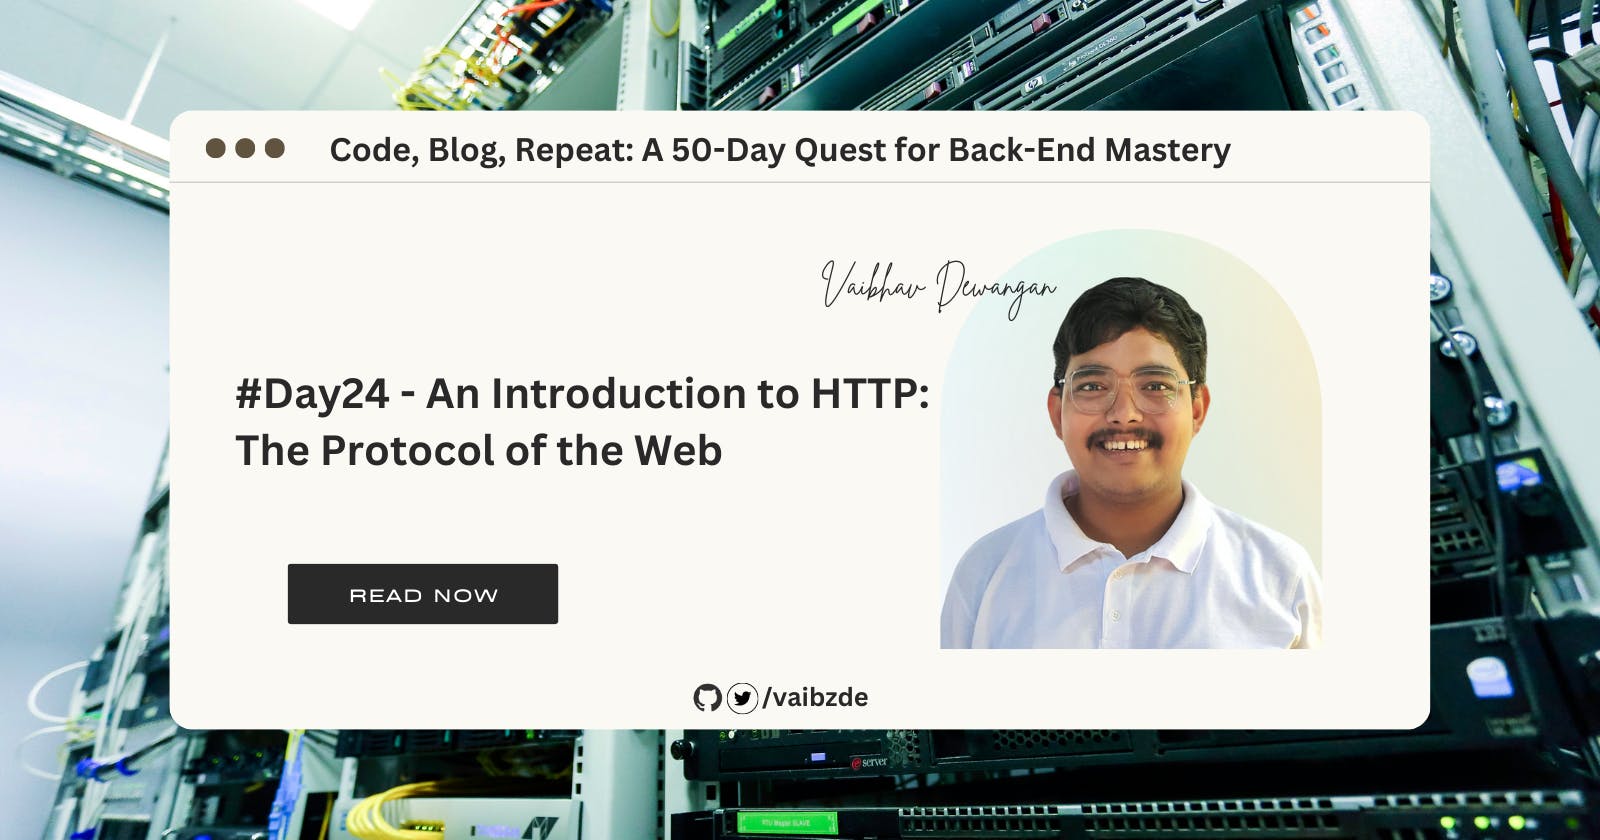 #Day24 - An Introduction to HTTP: The Protocol of the Web